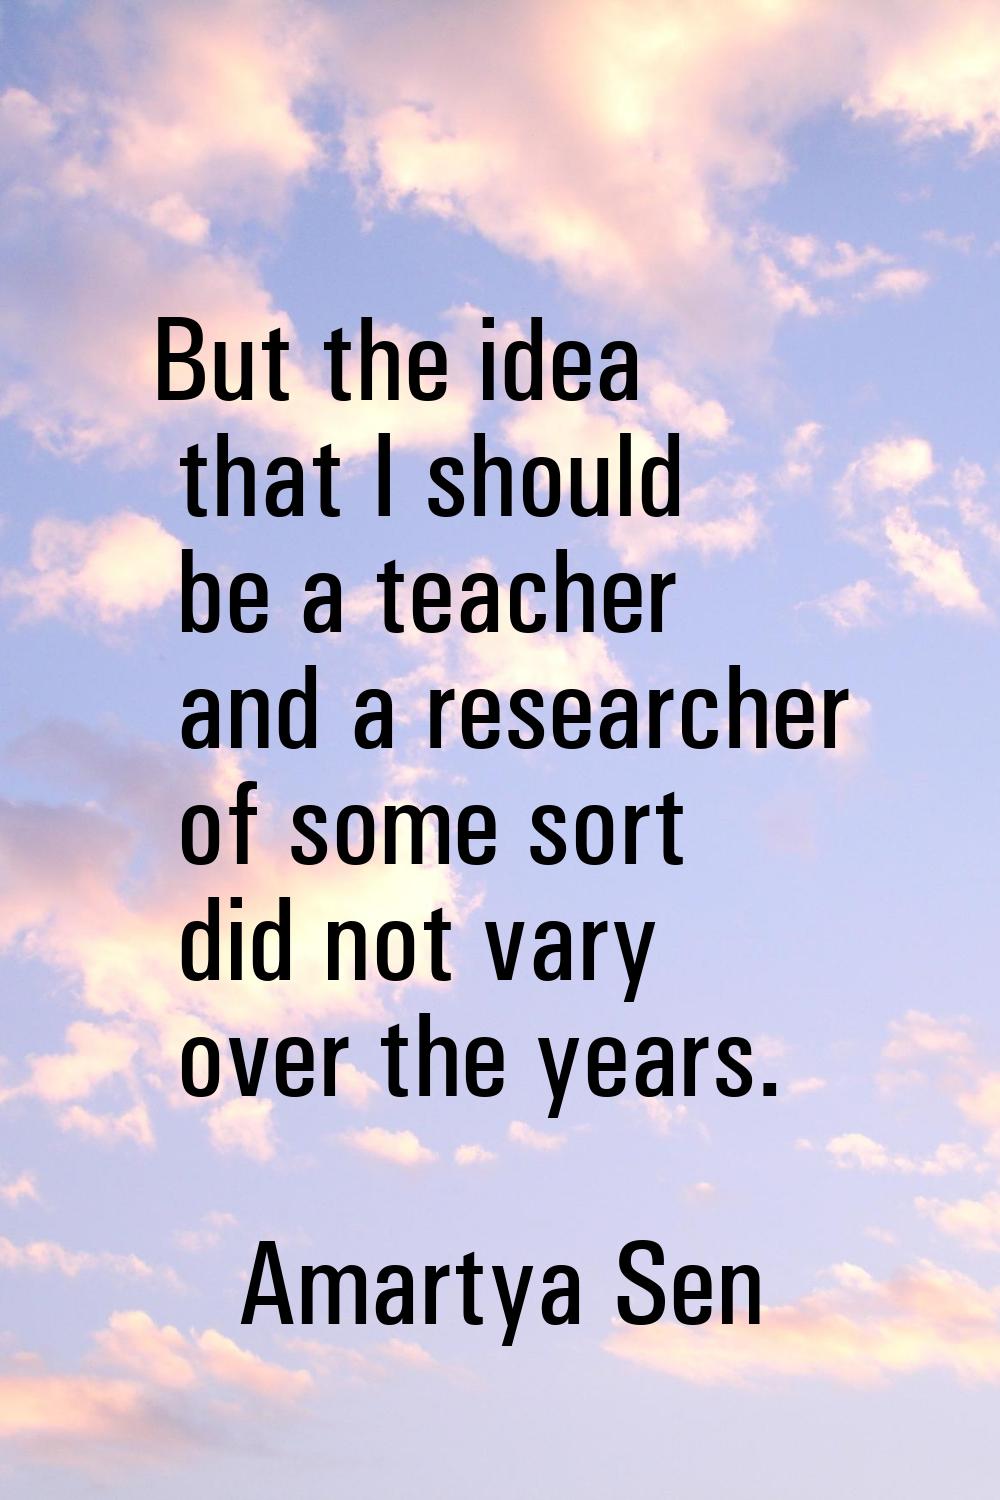 But the idea that I should be a teacher and a researcher of some sort did not vary over the years.